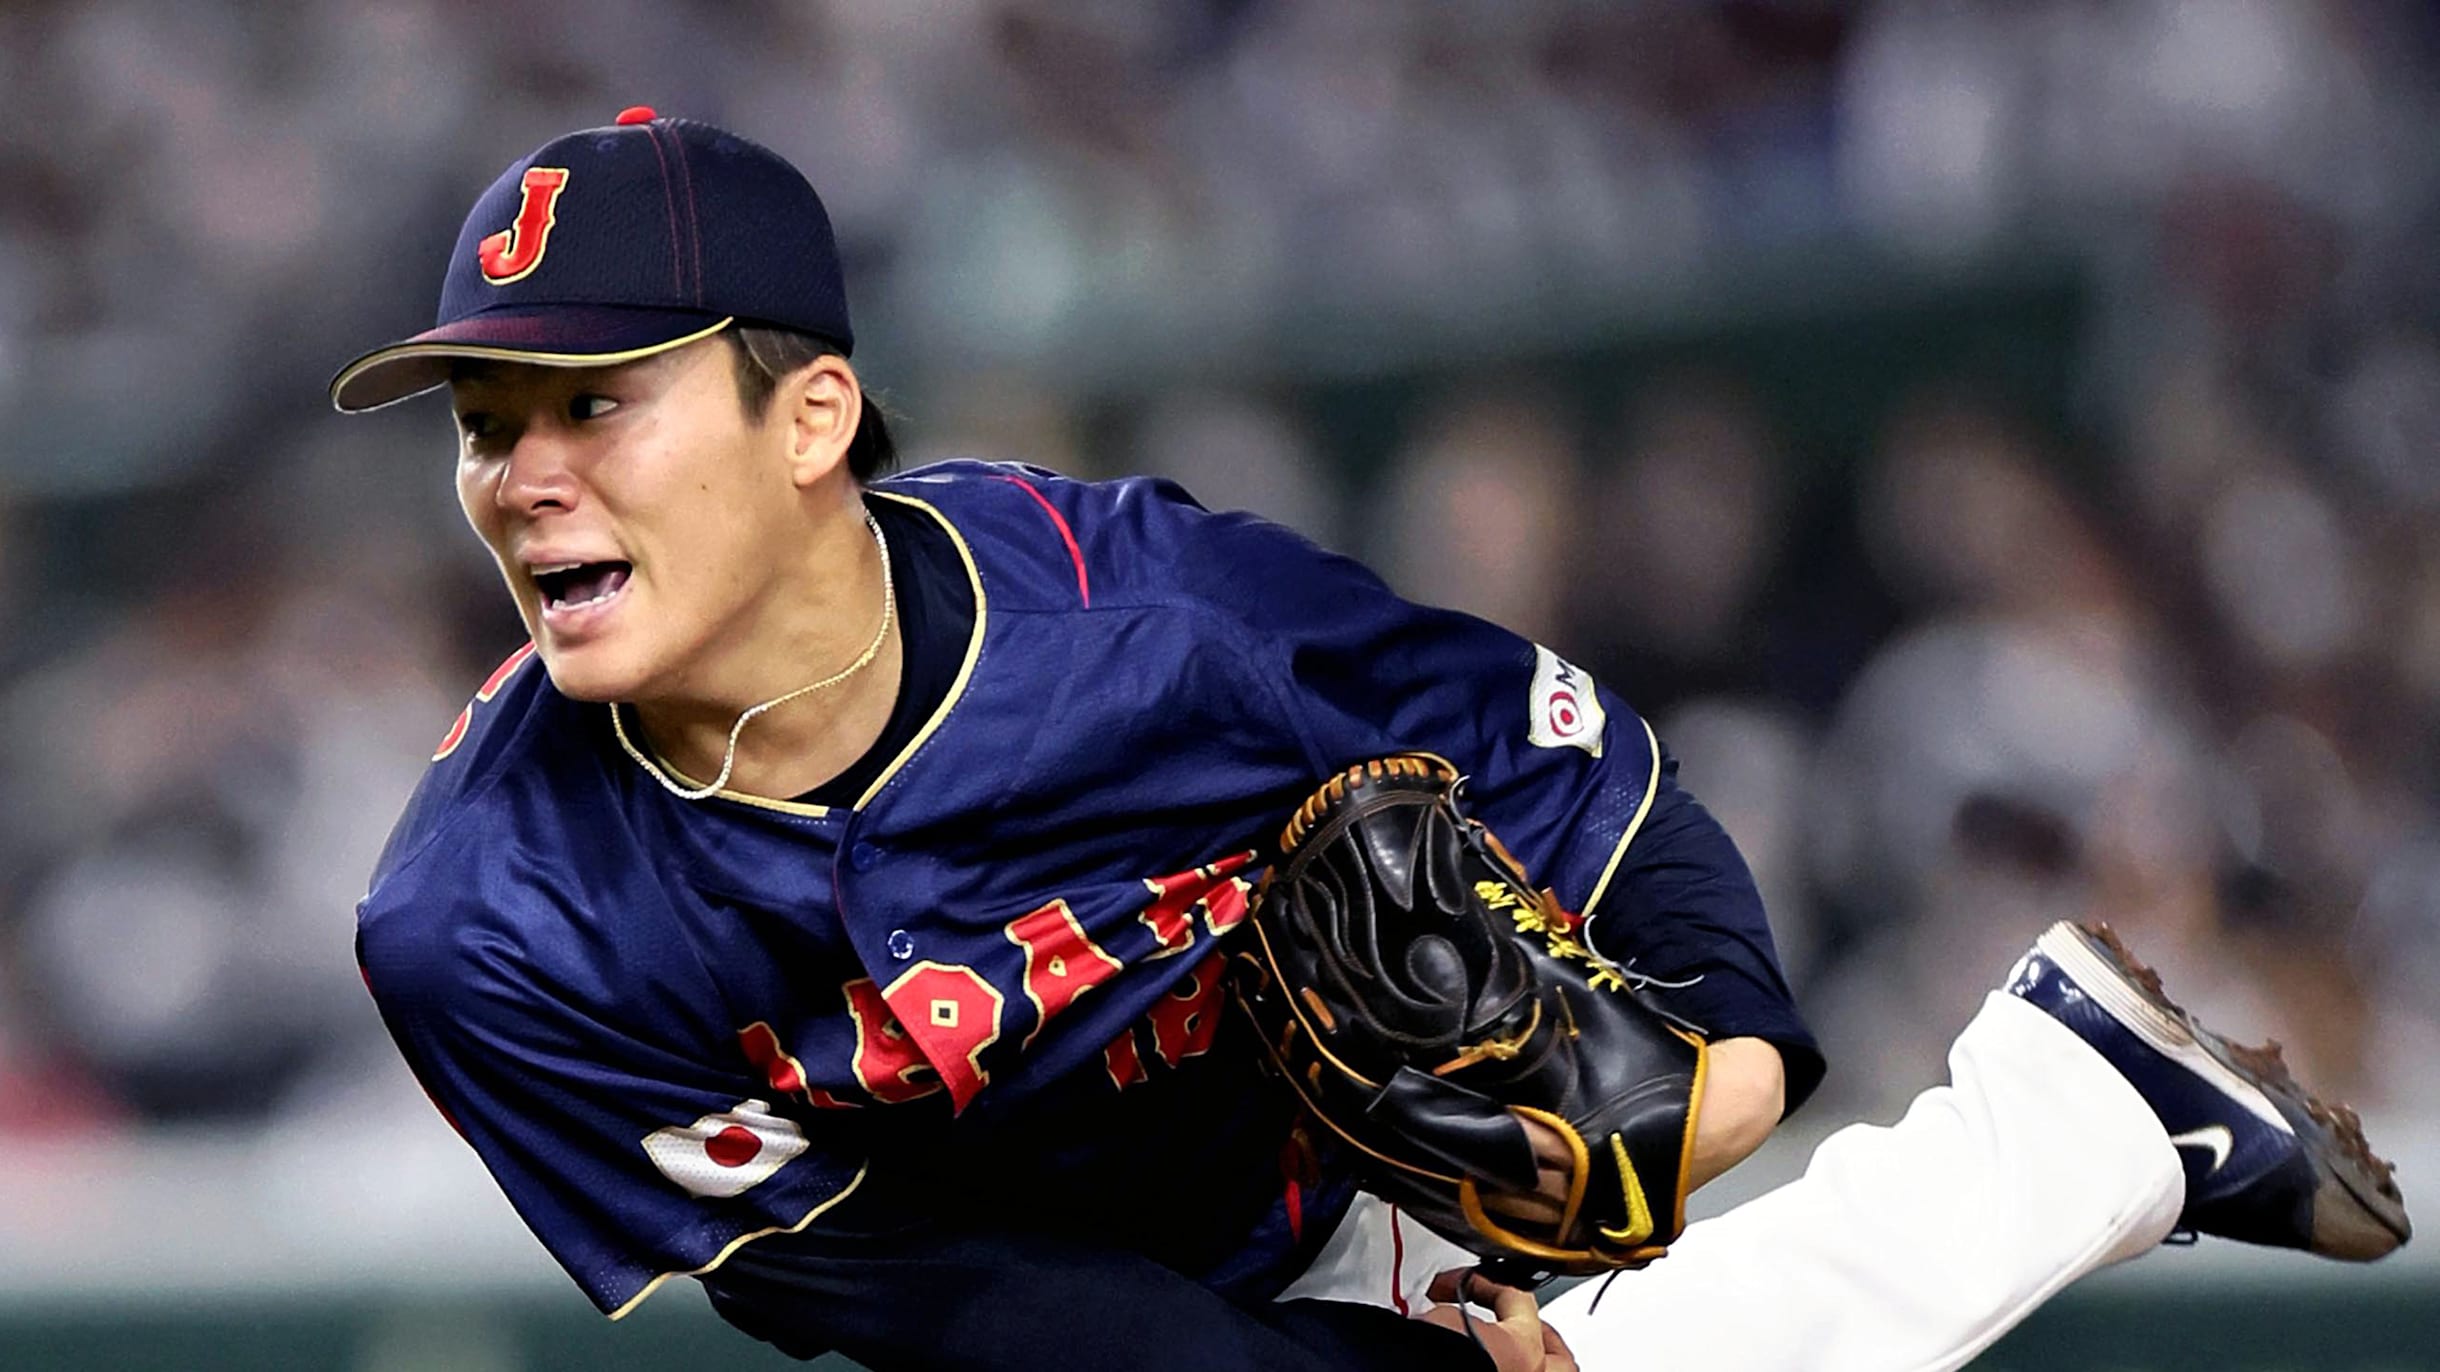 MLB News: Dodgers sign Yamamoto to 12-year, $325 million deal